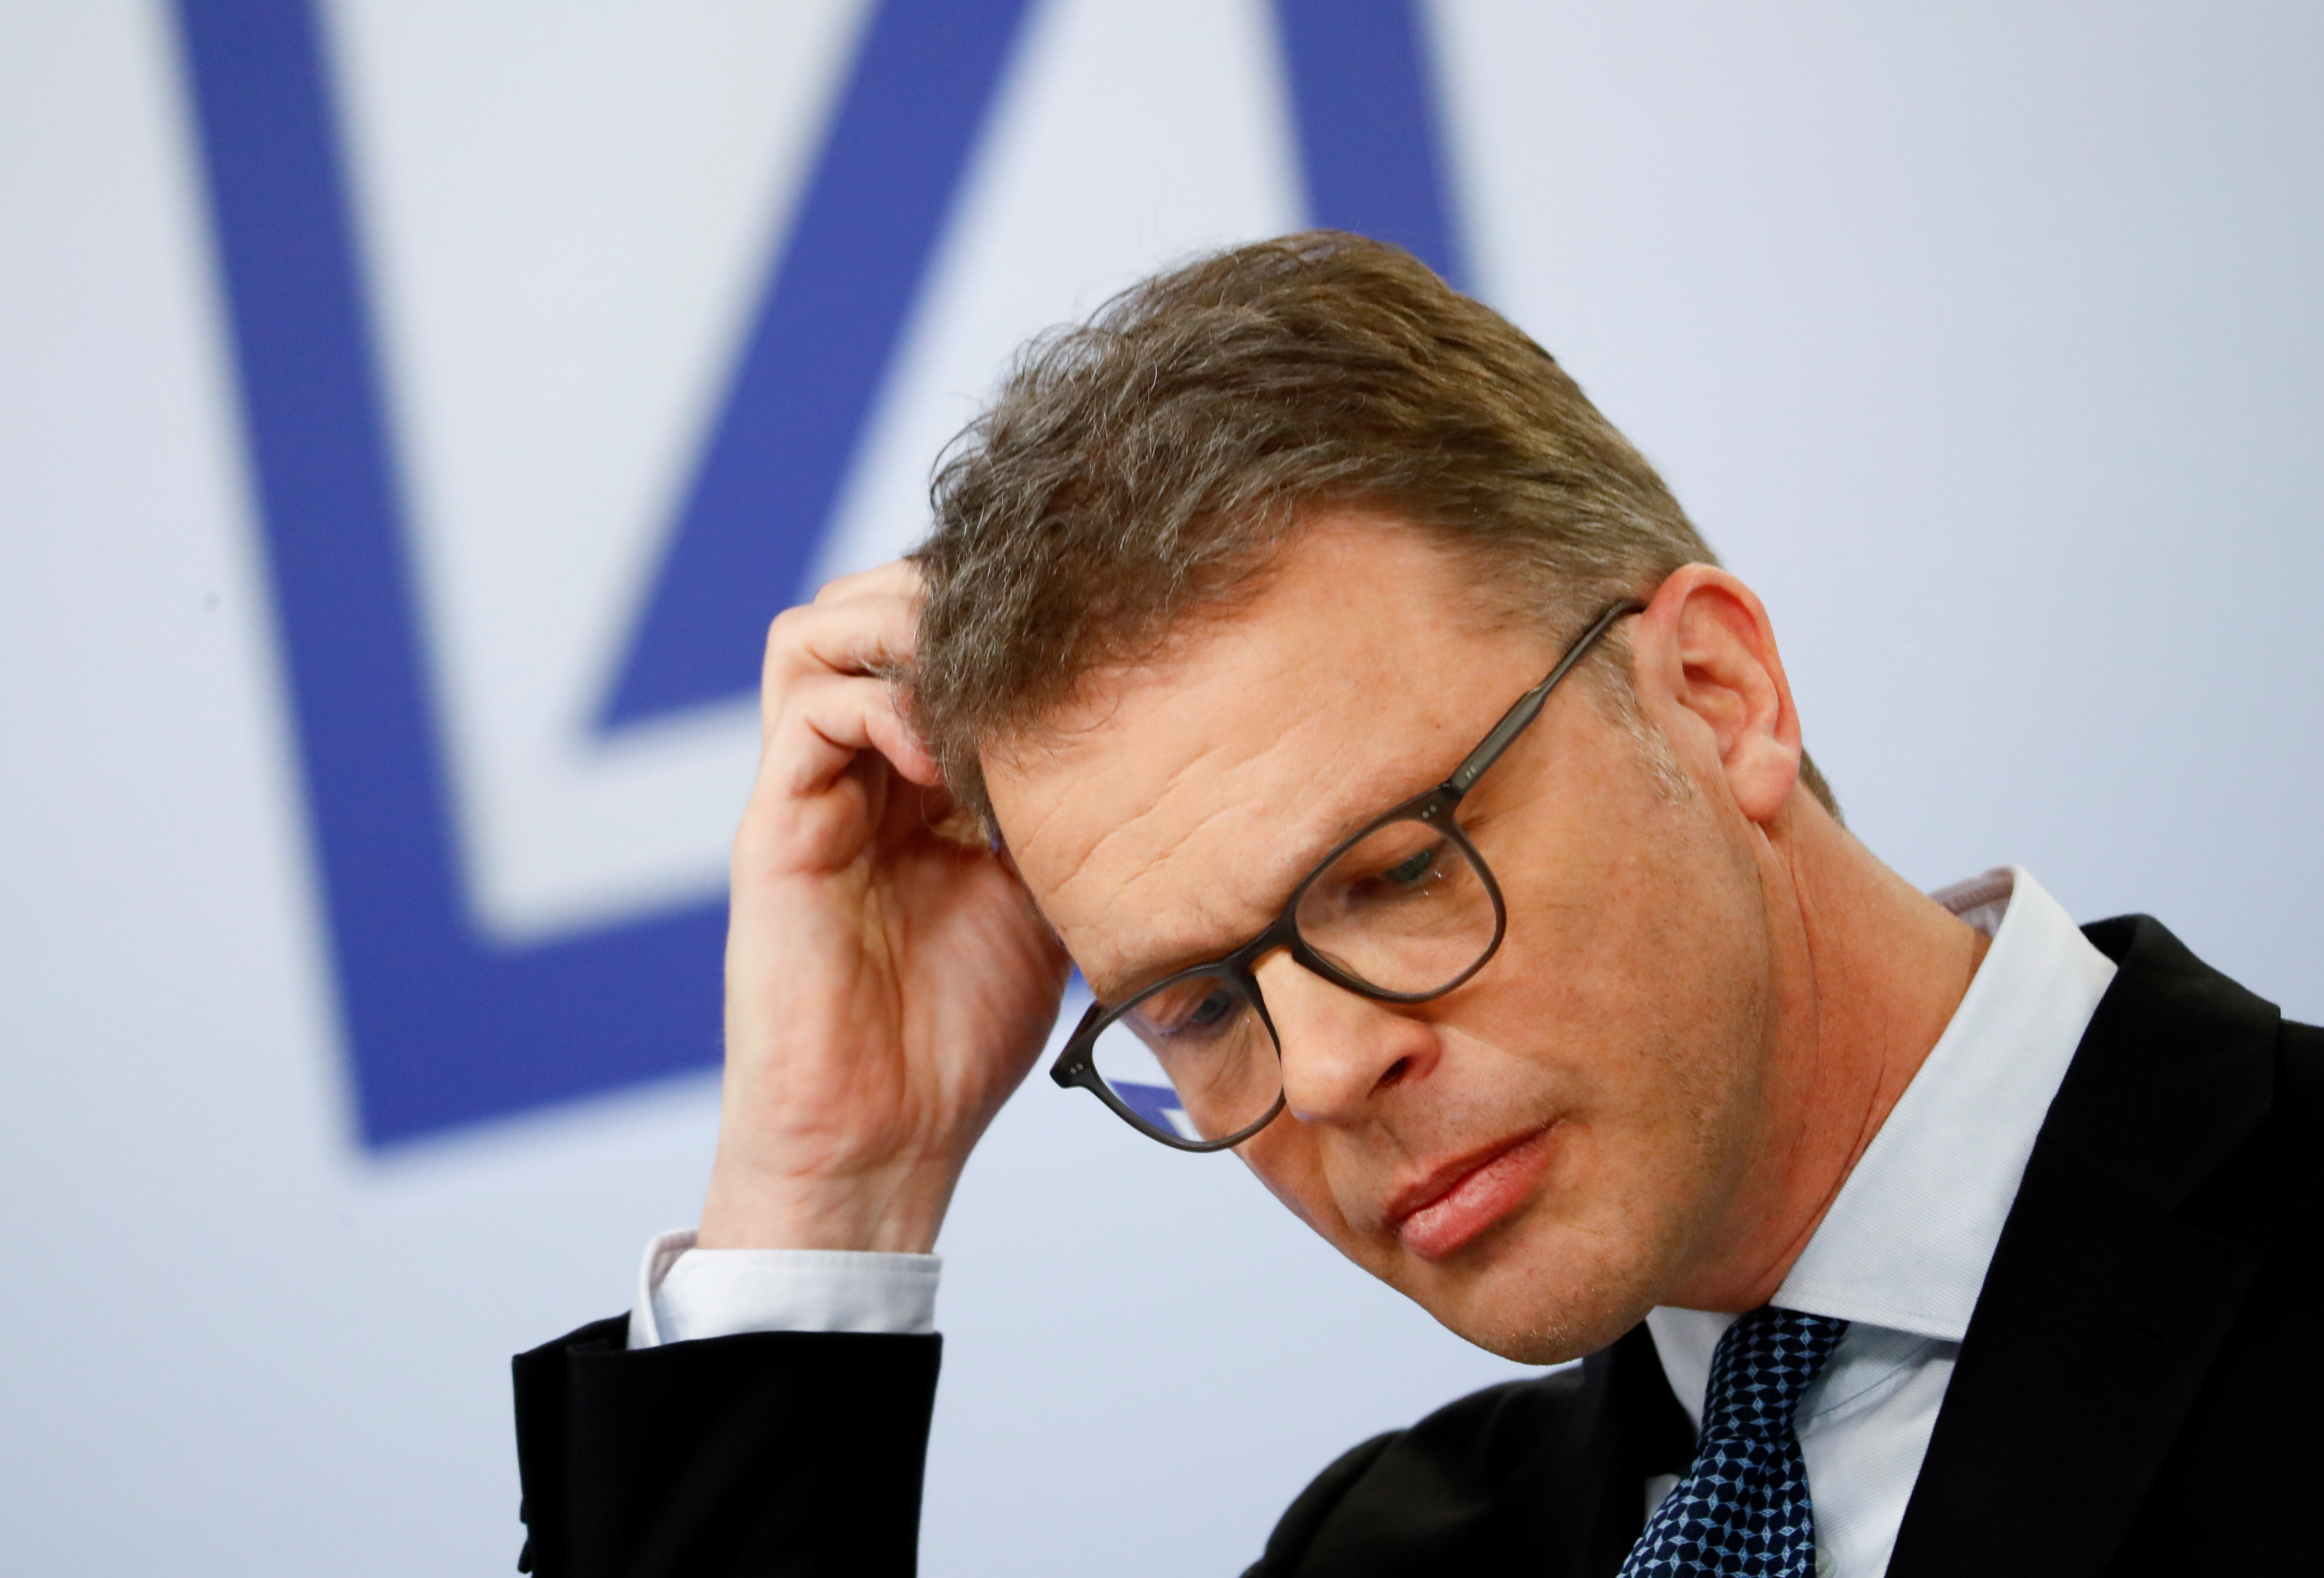 Christian Sewing, CEO of Deutsche Bank AG, gestures during the bank's annual news conference in Frankfurt, Germany January 30, 2020. REUTERS/Ralph Orlowski